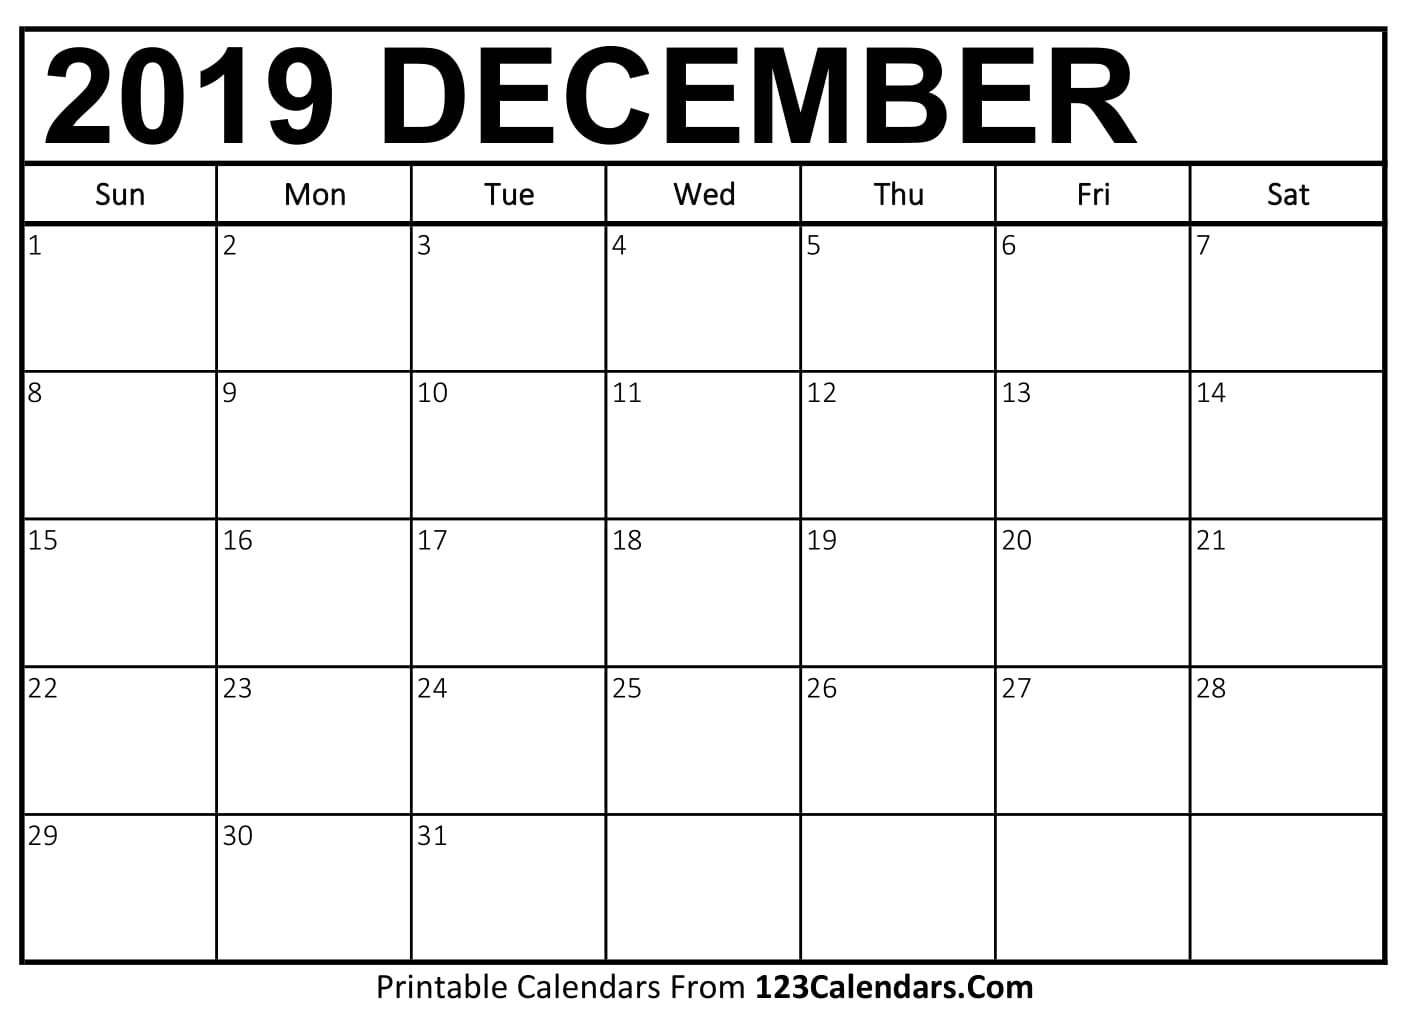 2018 December Free Calendar Printable Images Design With Notes